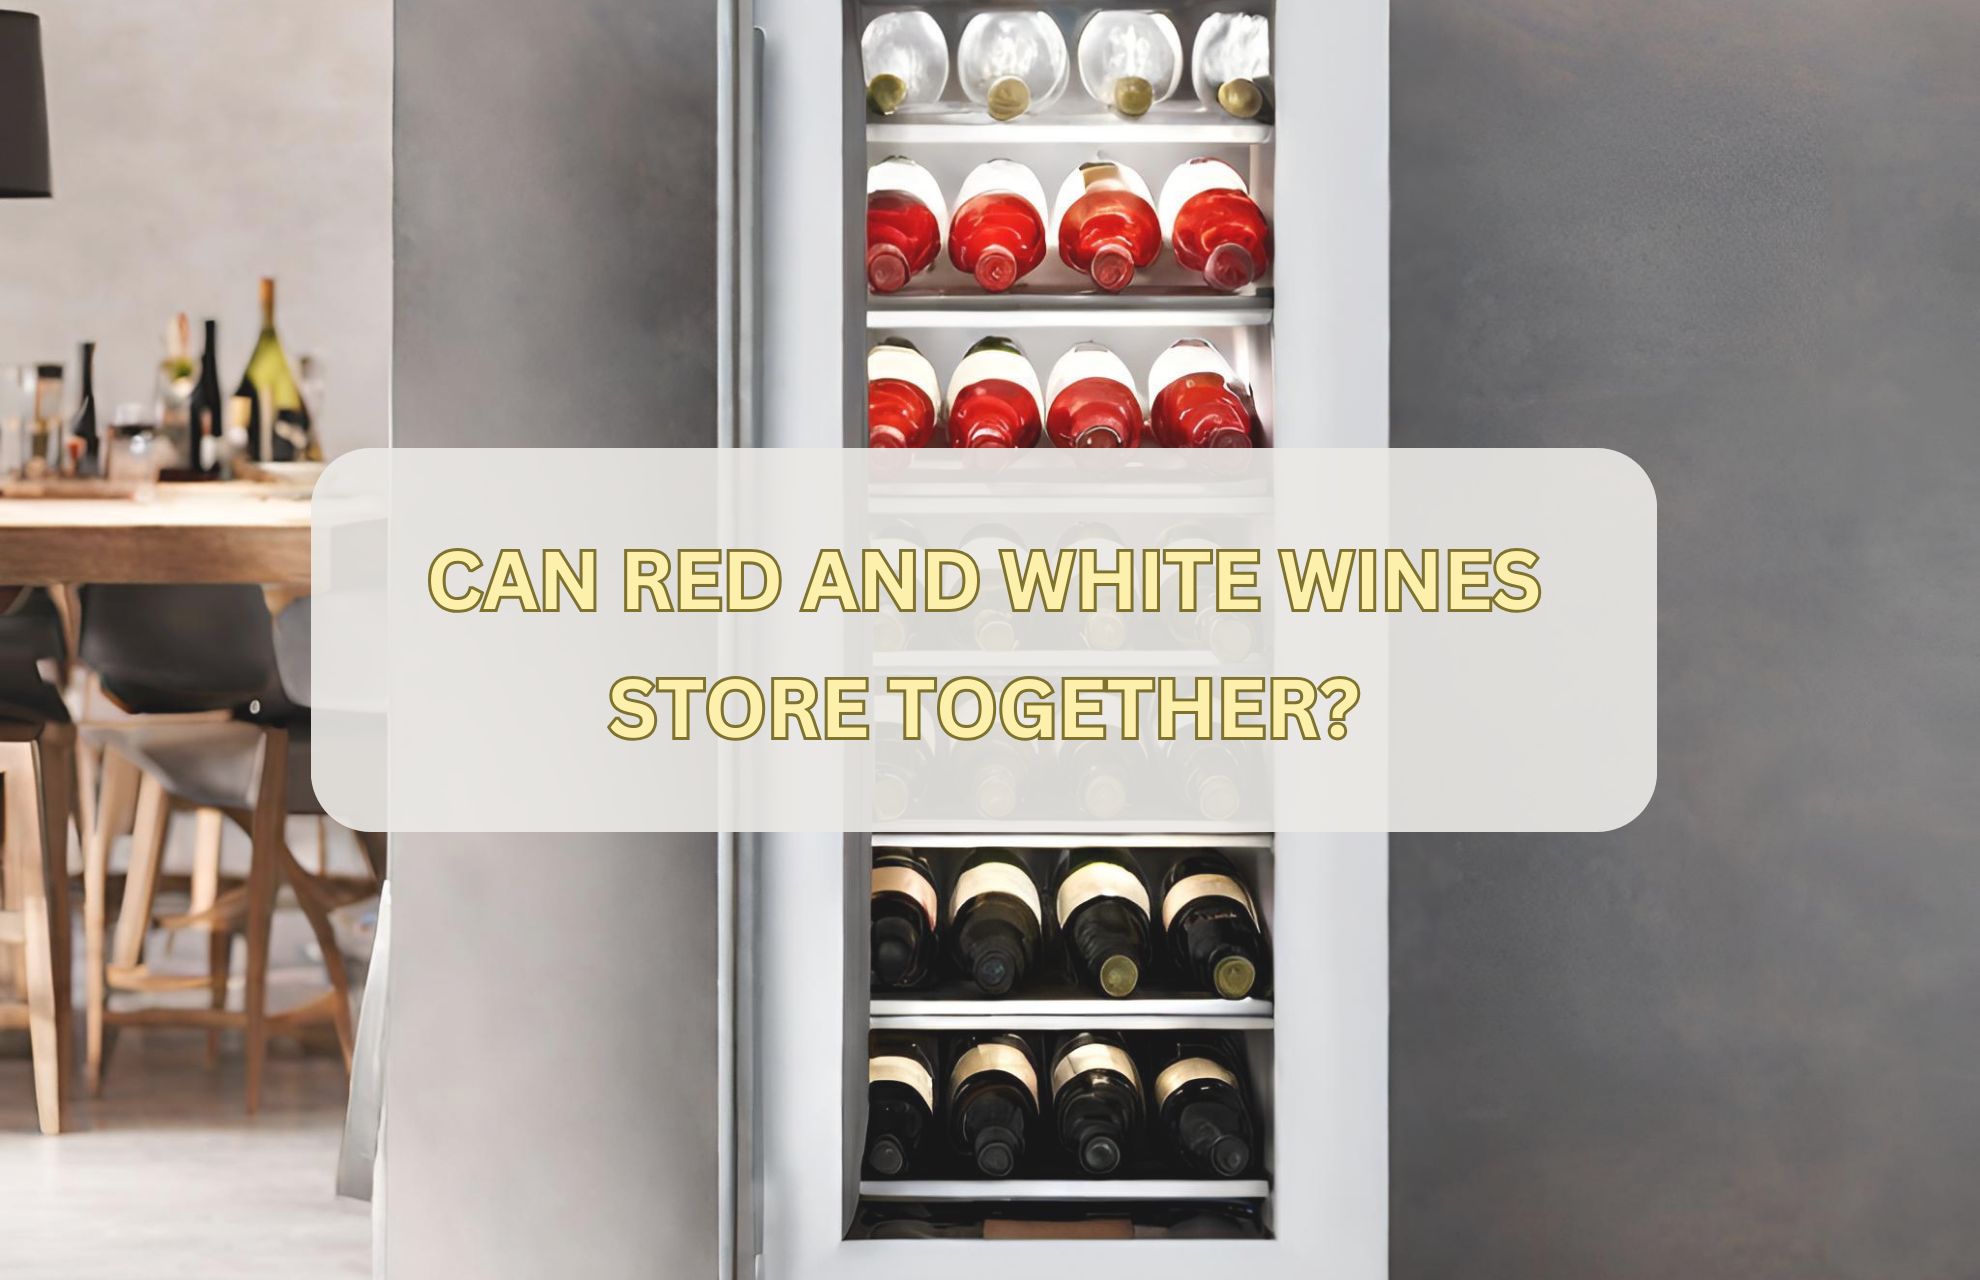 CAN RED AND WHITE WINES STORE TOGETHER?